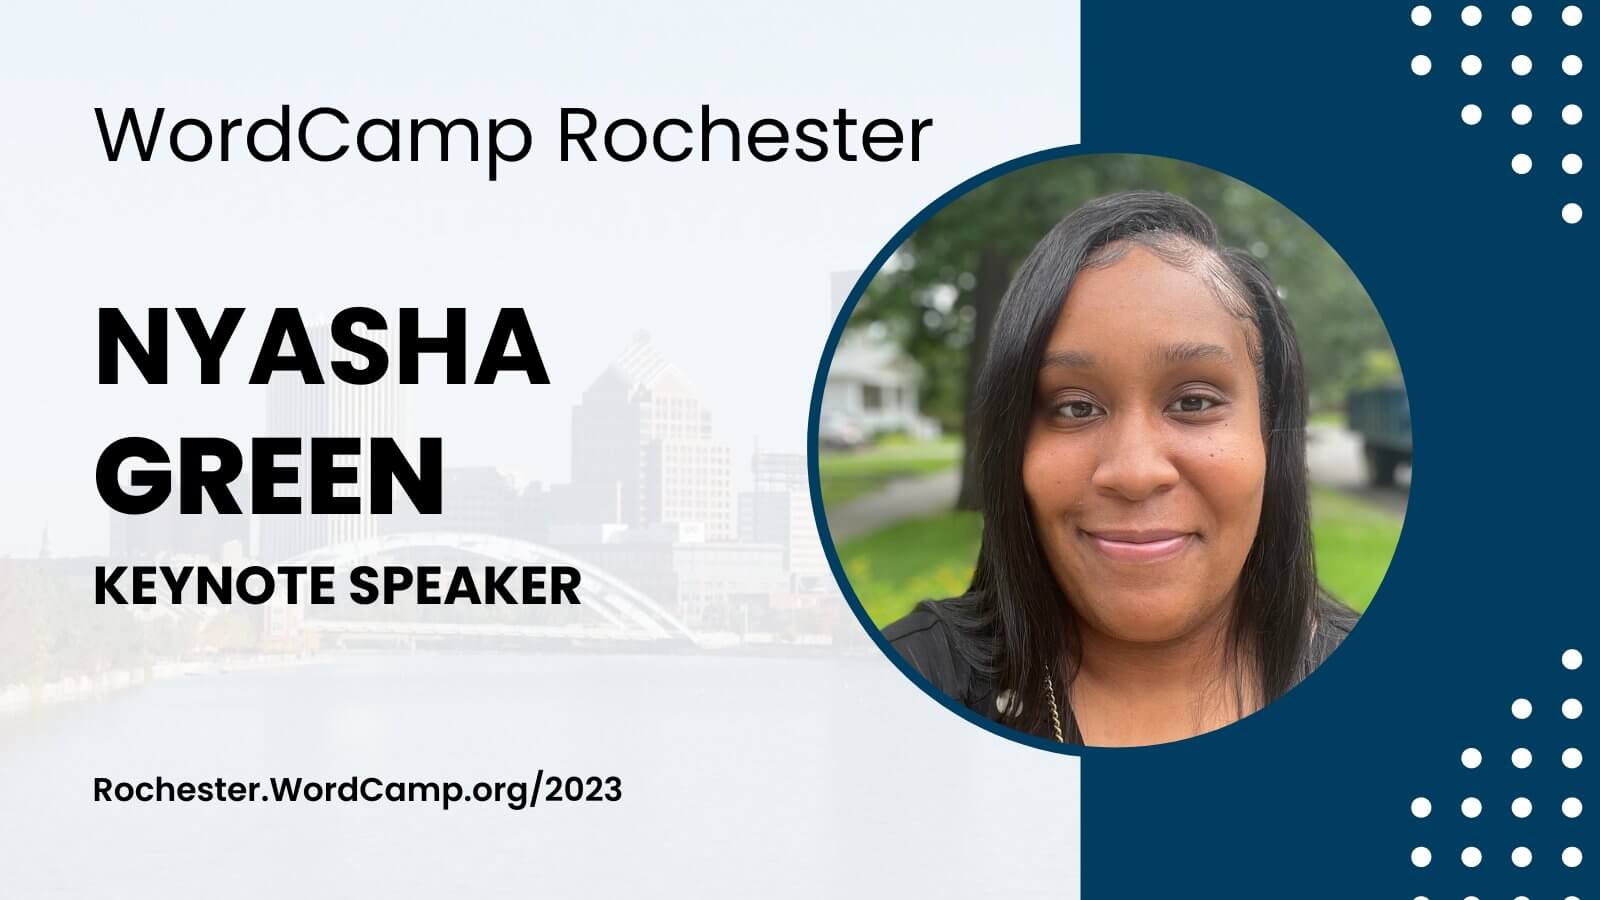 Promotional graphic for WordCamp Rochester with a person's portrait to the right and event details to the left on a blue and white design.